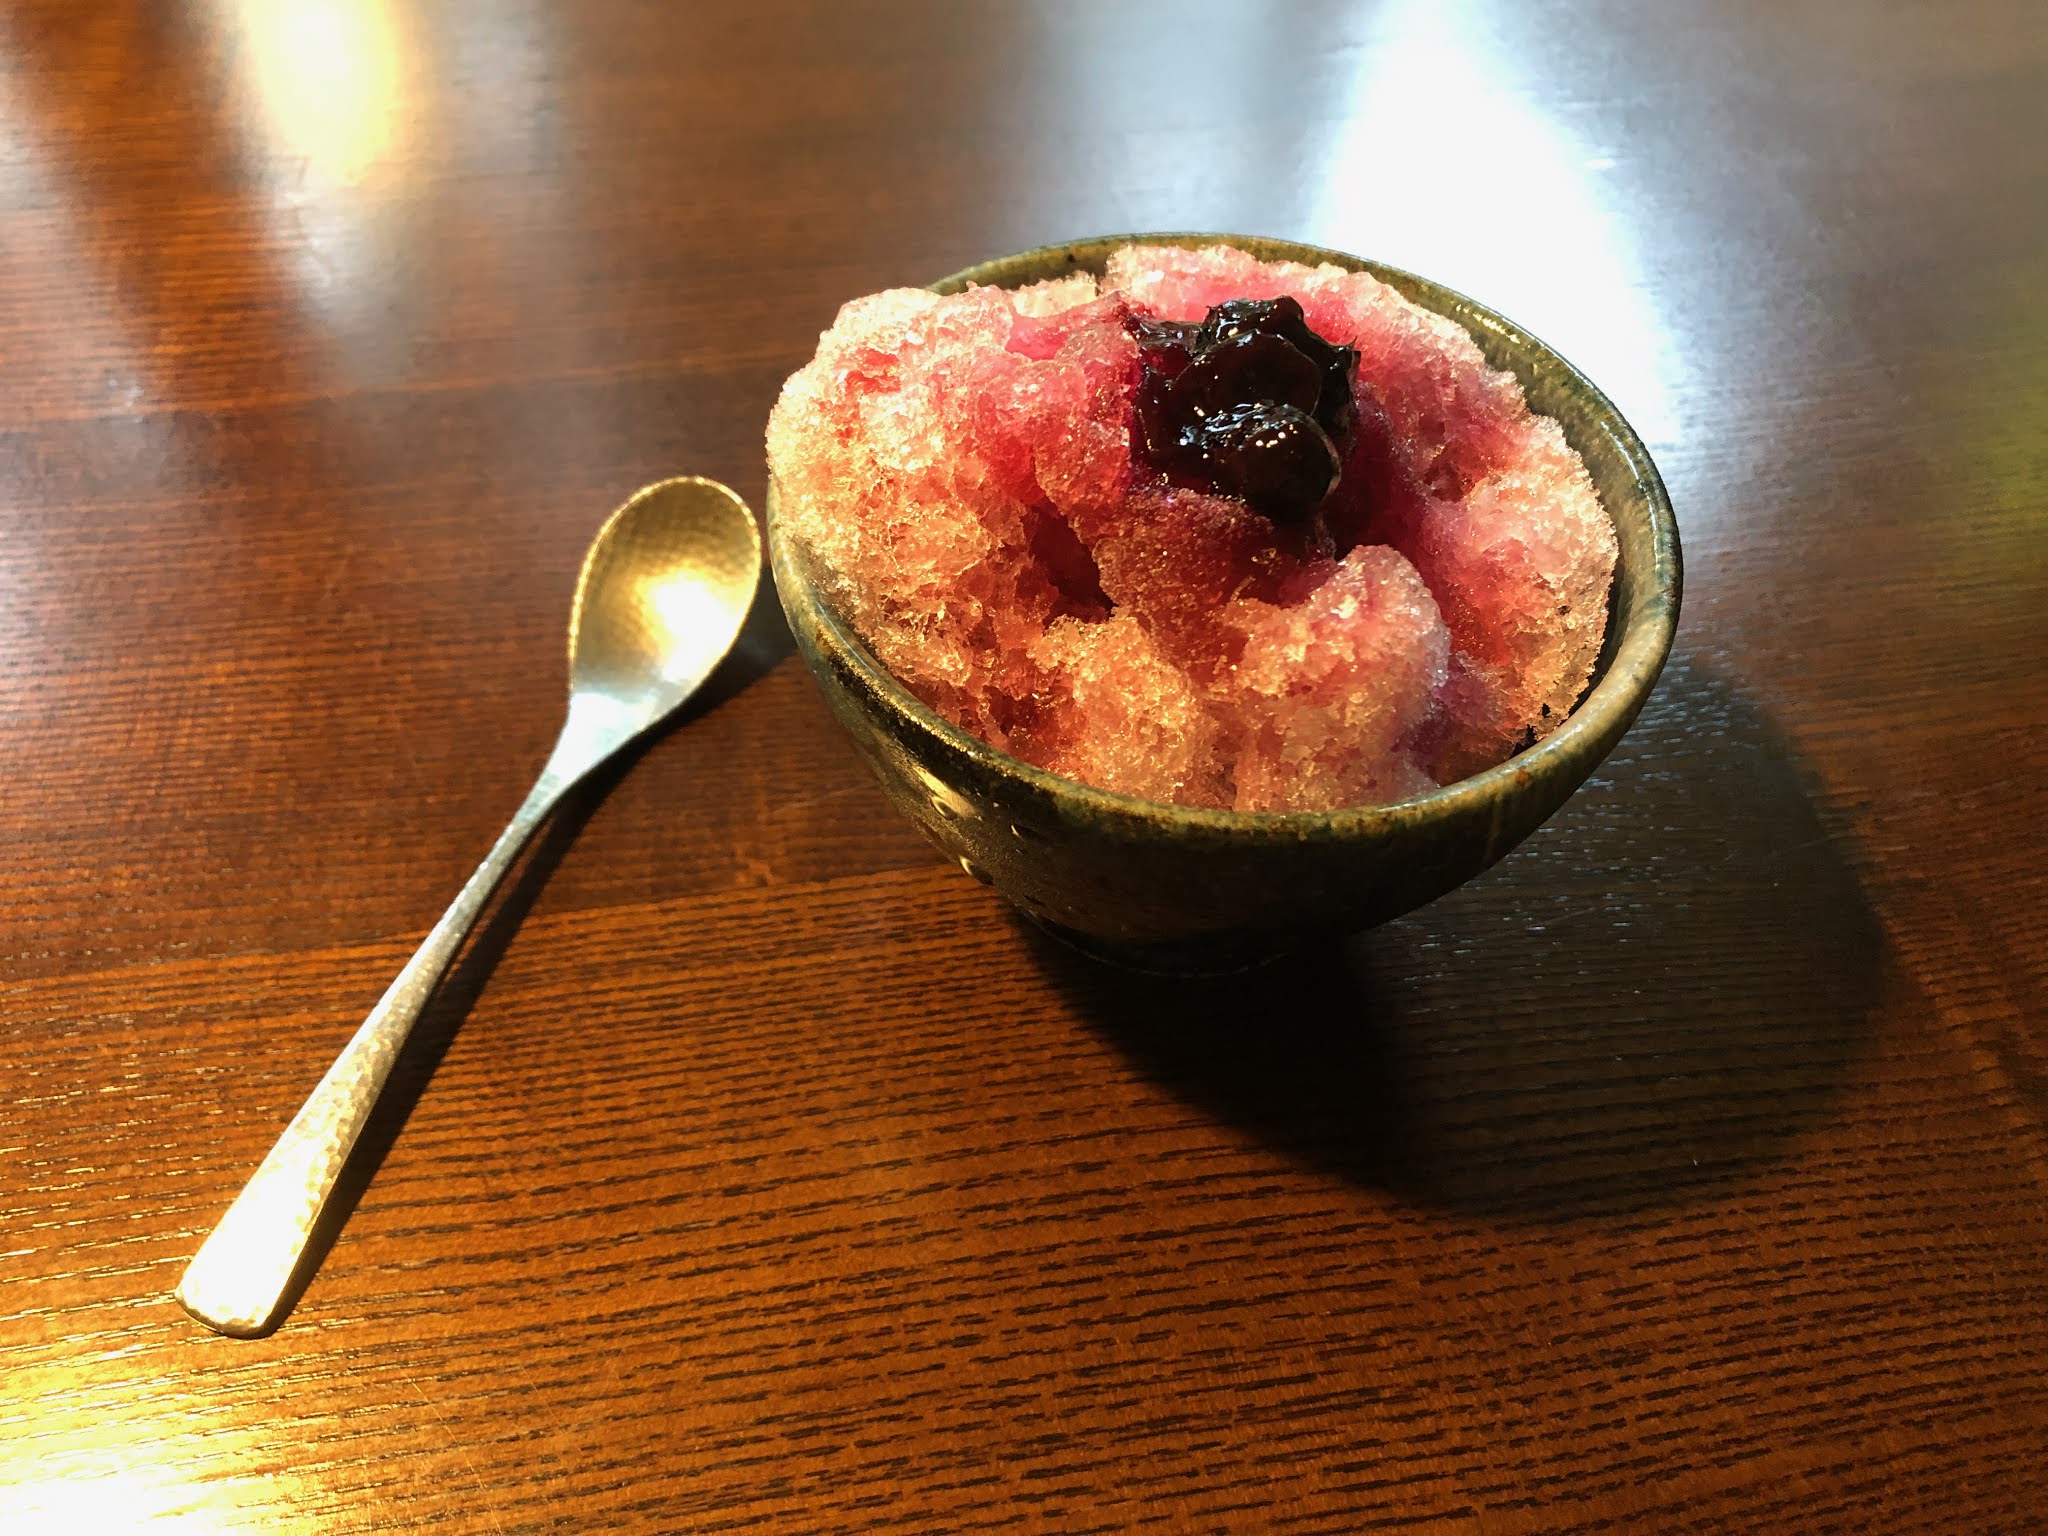 Forget Ice Cream, AQUA Water Jelly is the Hottest Summer Treat in Japan  This Summer - TechEBlog